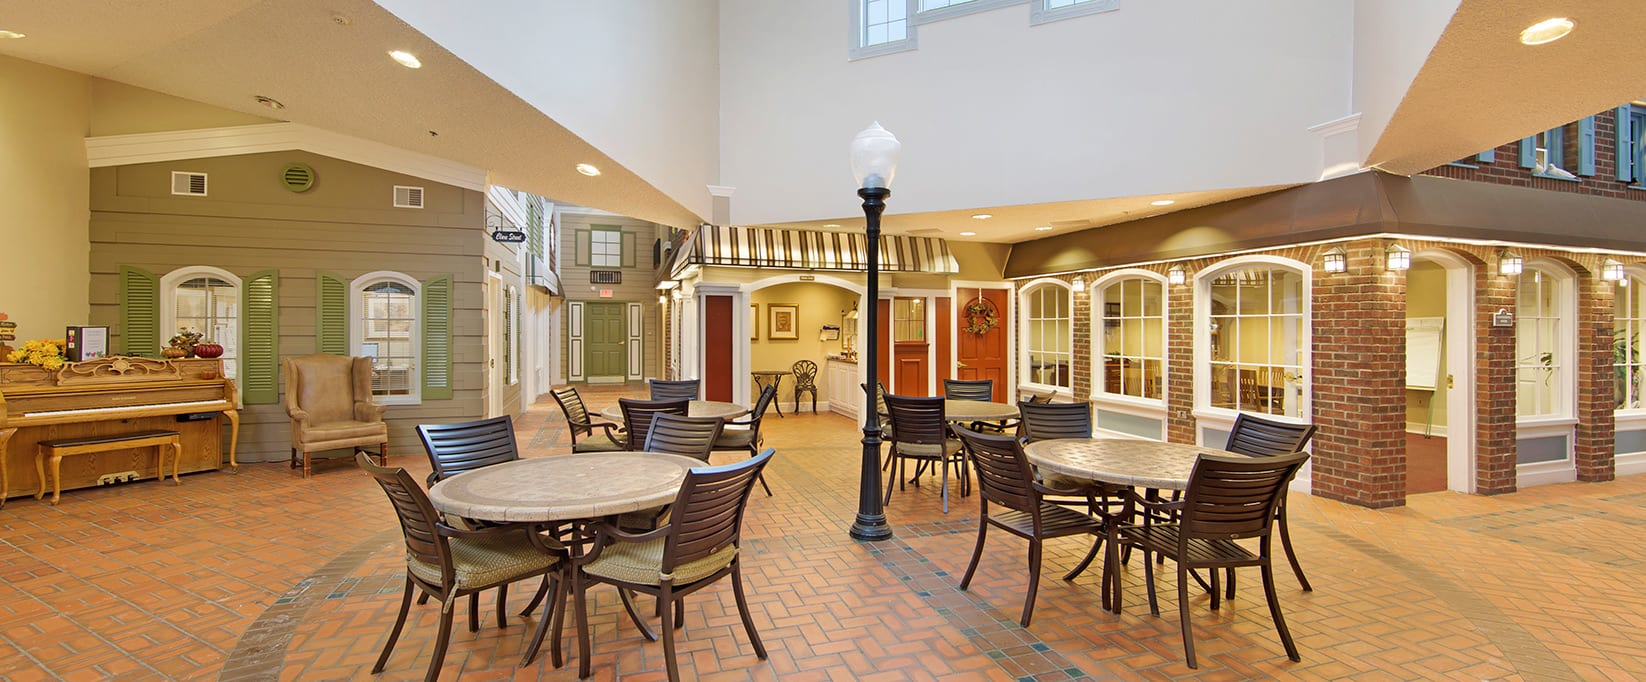 Brookdale Grand Blanc Memory Care indoor common area